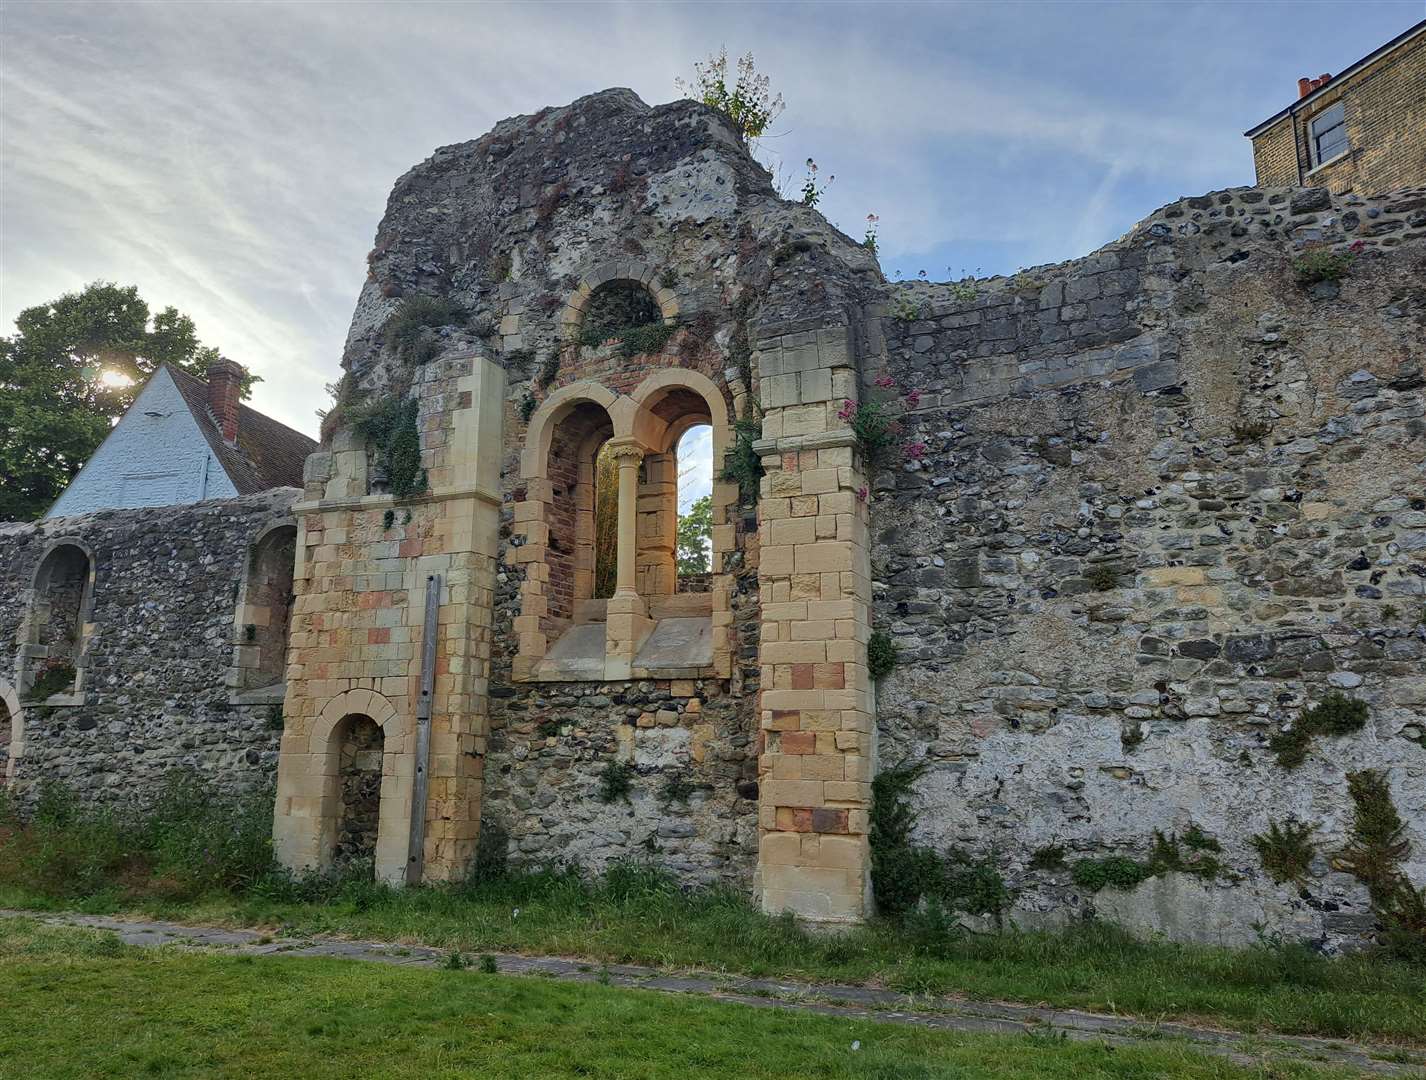 The ruin of St James' Church, Dover - where heritage experts have warned the proposed McDonald's site will disturb graves still underground